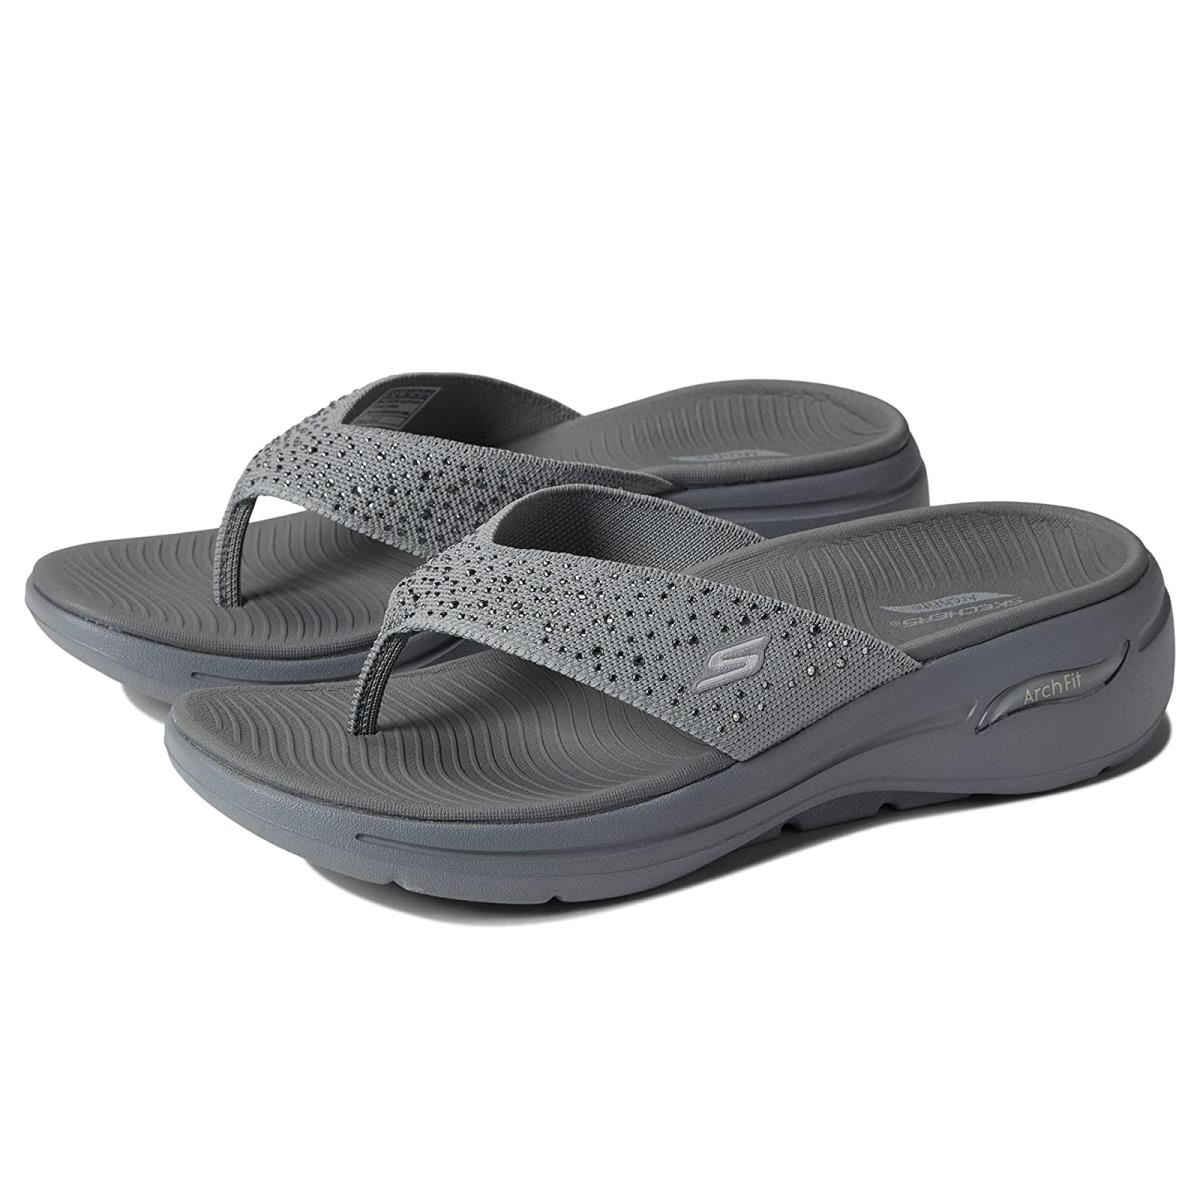 Woman`s Shoes Skechers Performance Go Walk Arch Fit Knit Sandal with Rhinestones Gray